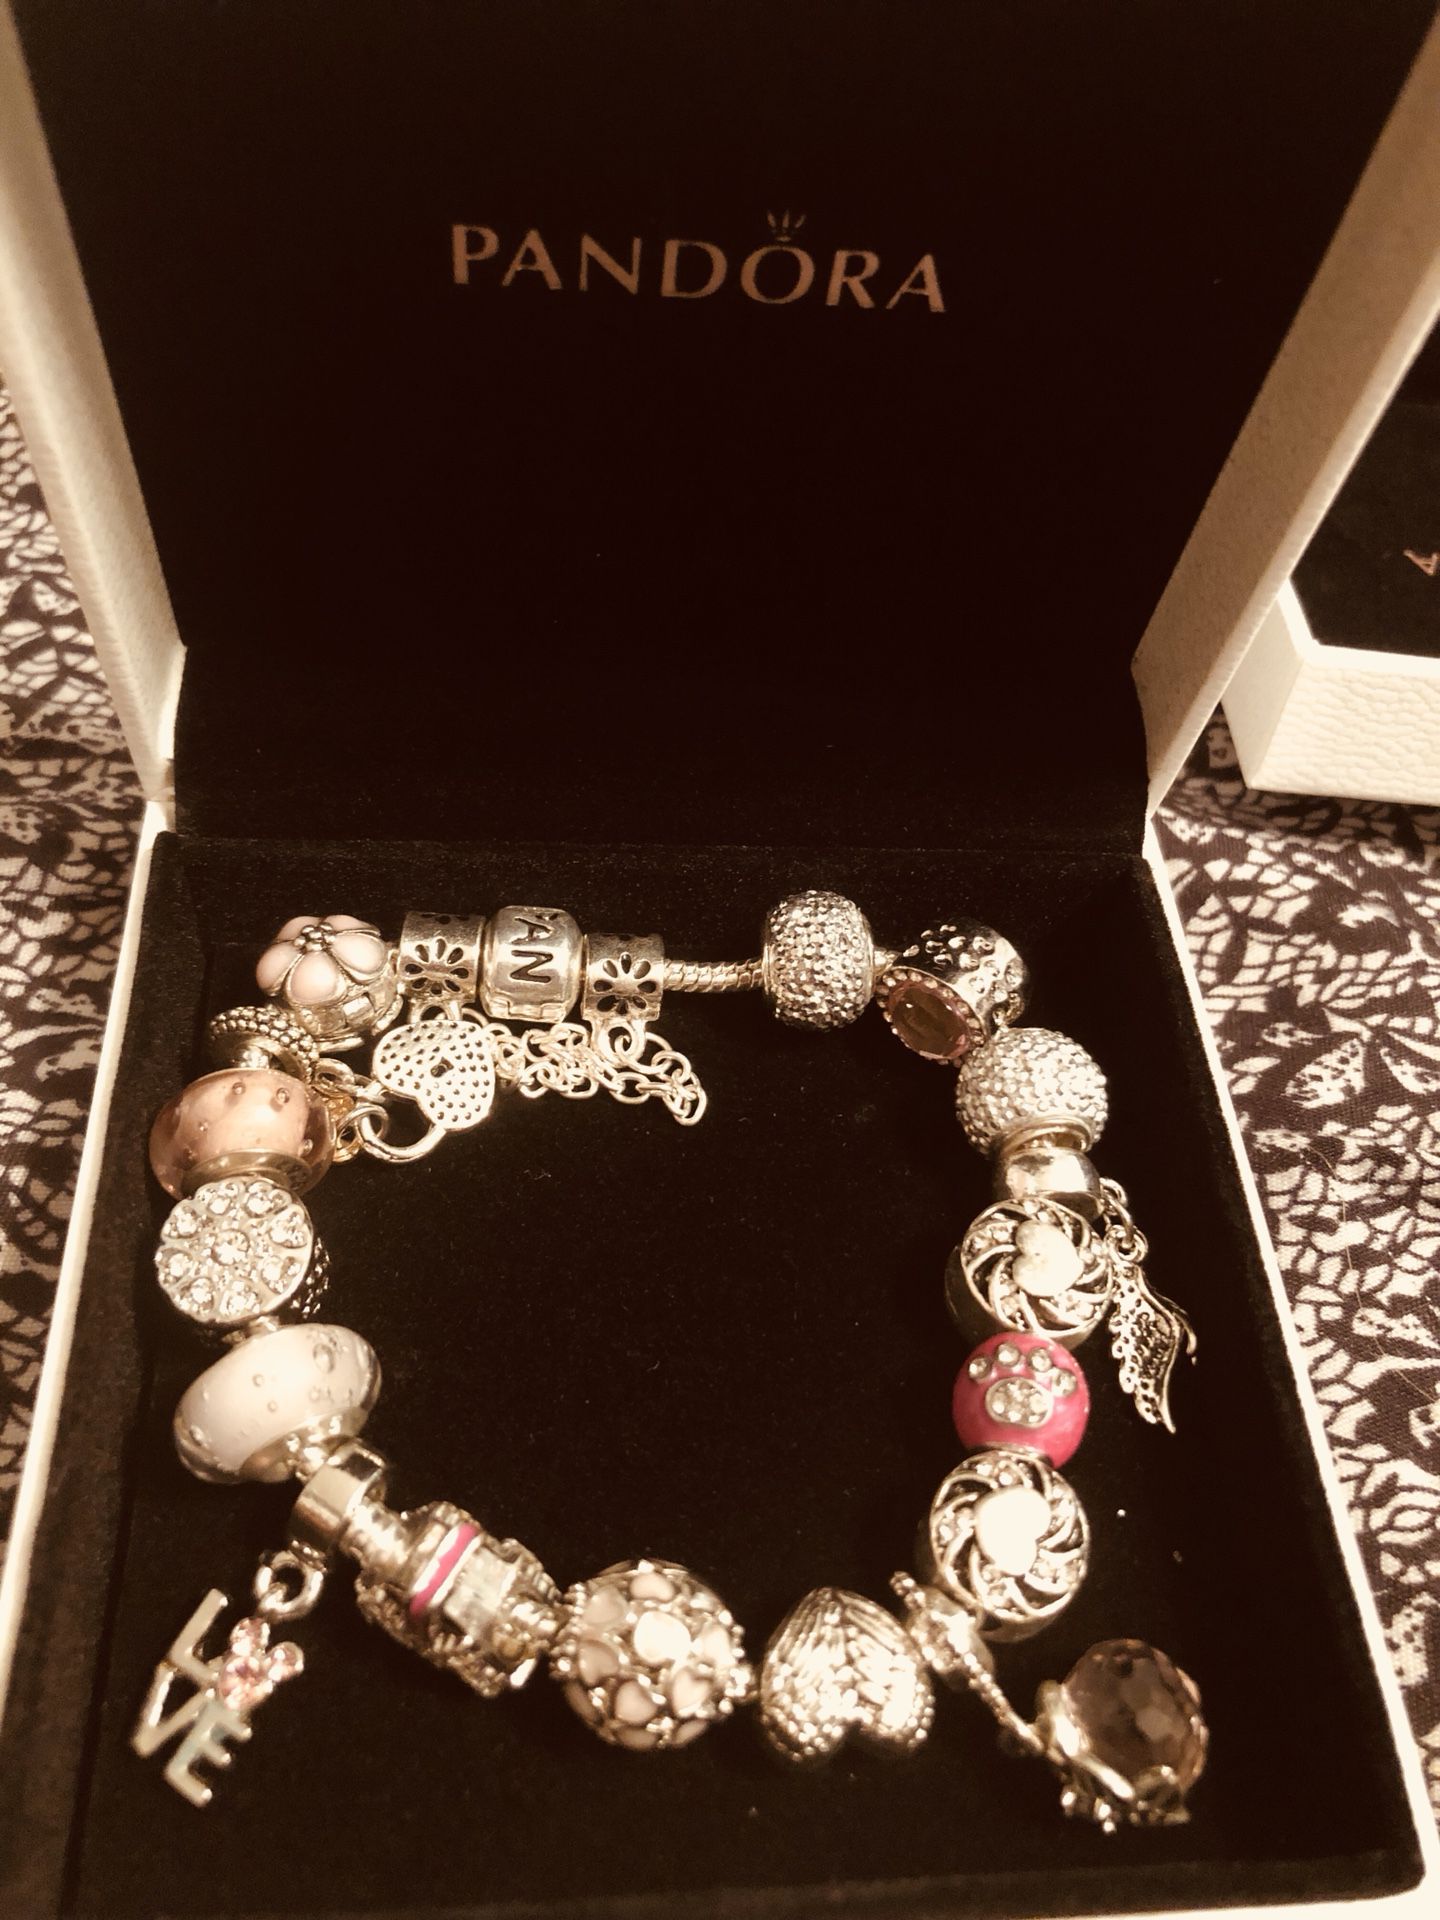 Beautiful sterling silver bracelet with charms